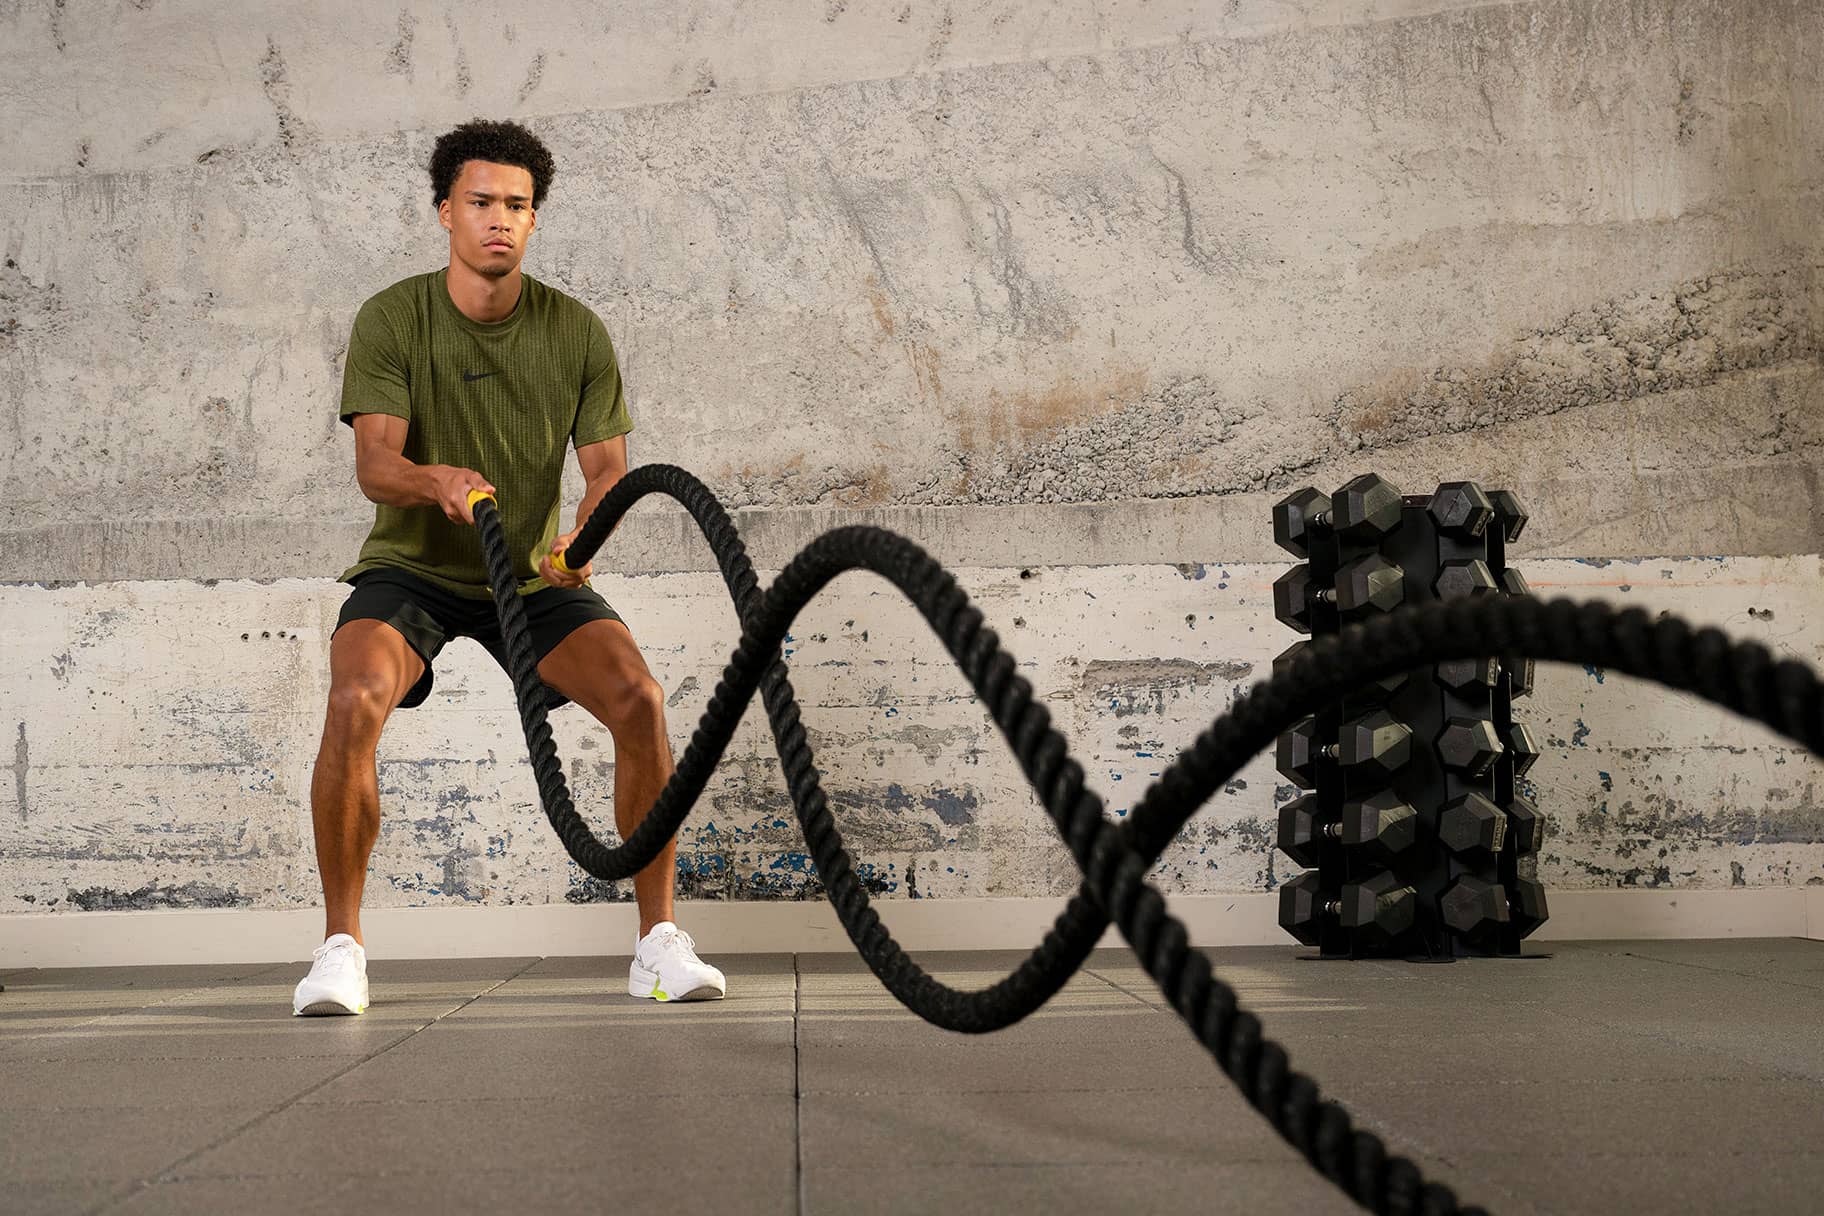 Battle Ropes: What They Are, Their Benefits and Exercises You Can Do